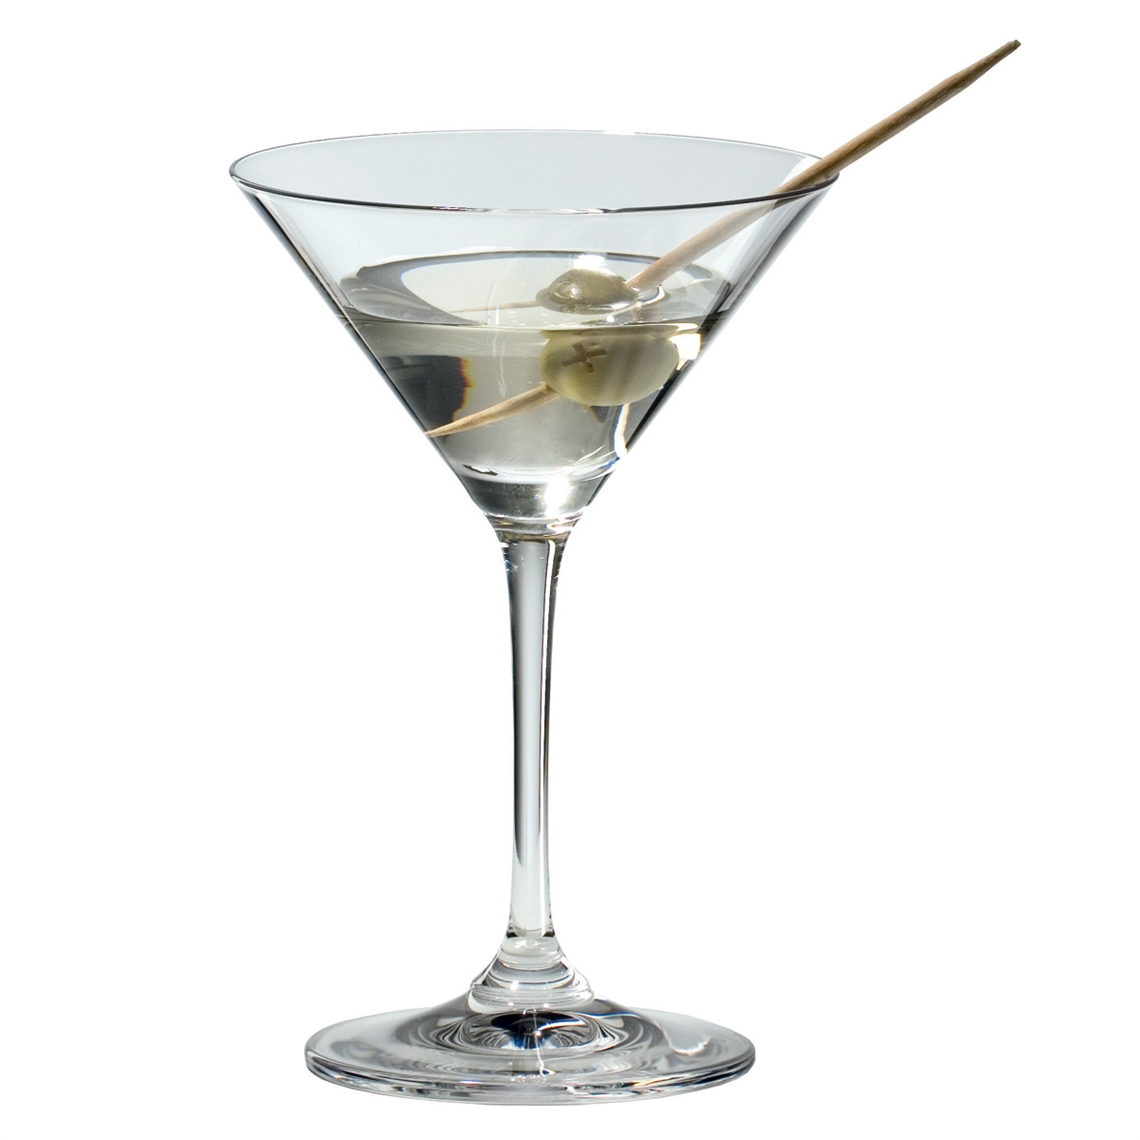 View more restaurant & trade glasses from our Martini Glasses range